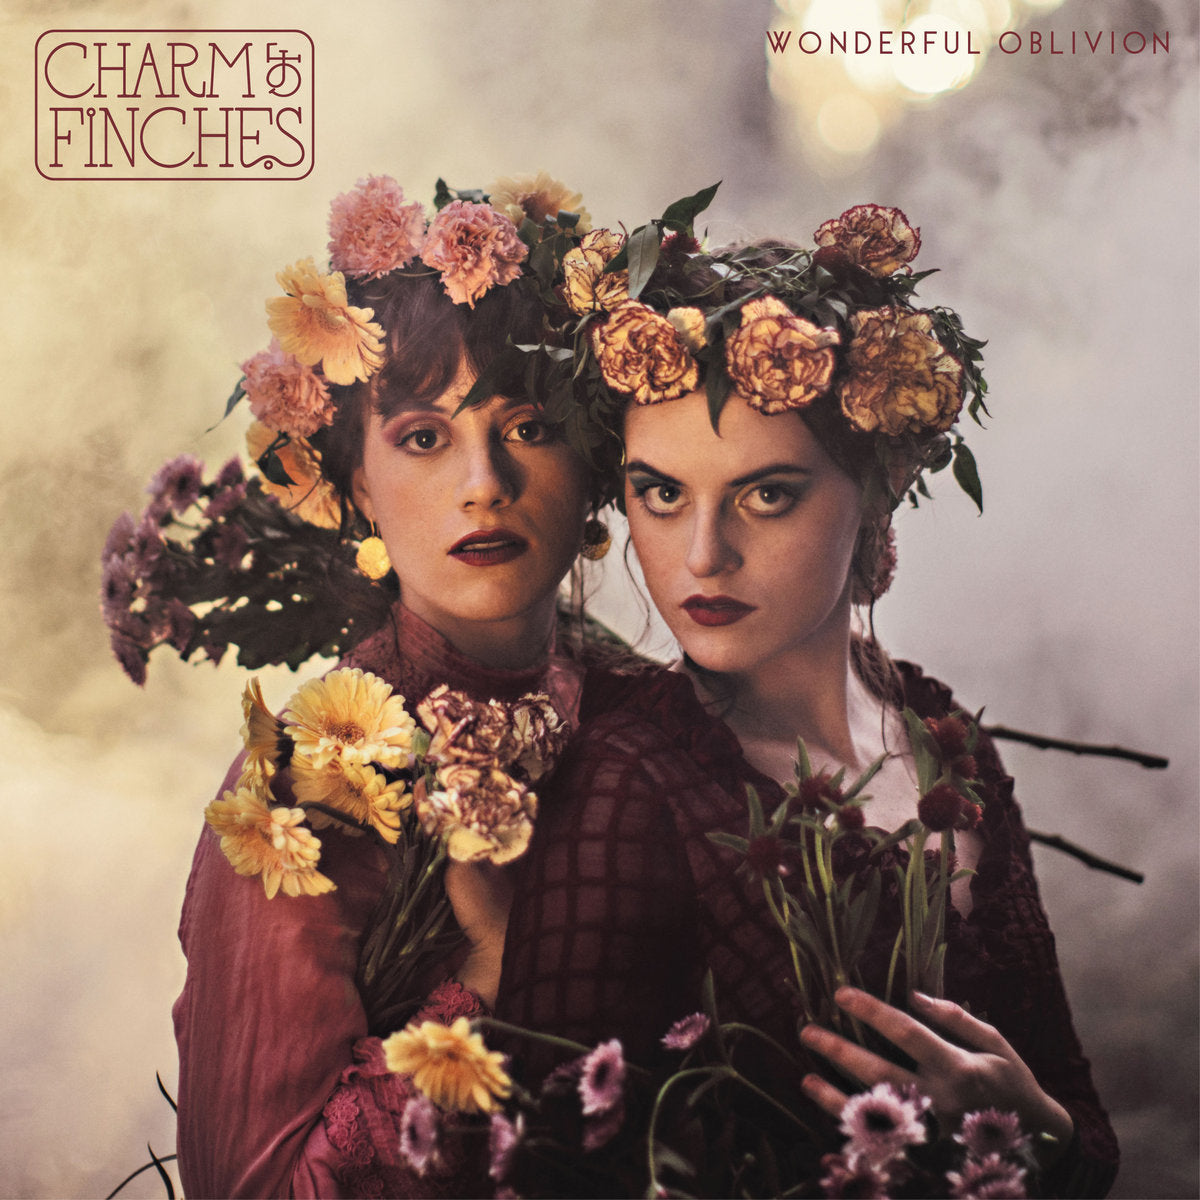 Charm of Finches – ‘Wonderful Oblivion’